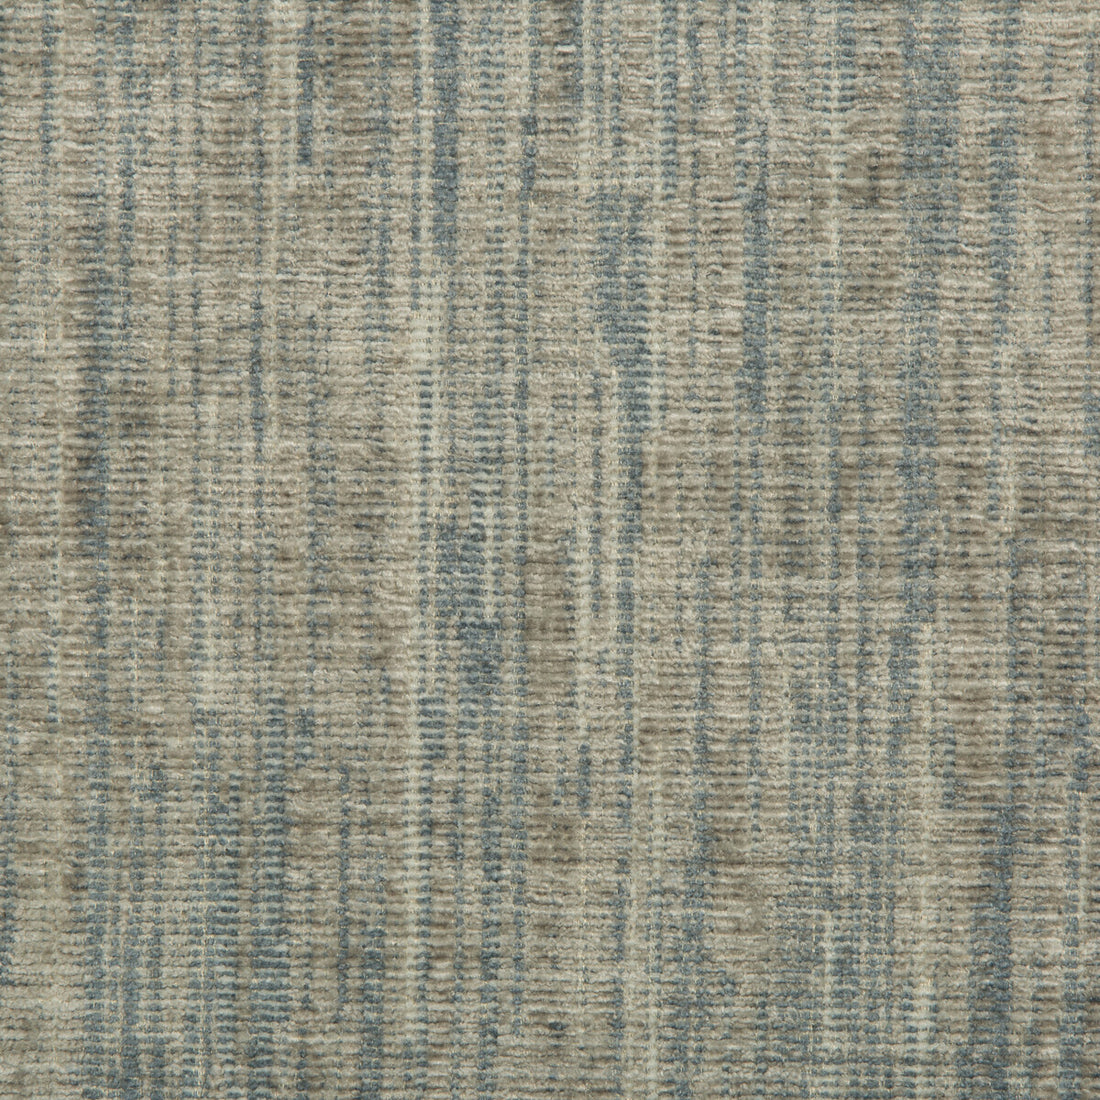 Now And Zen fabric in seaglass color - pattern 35445.15.0 - by Kravet Couture in the Izu Collection collection